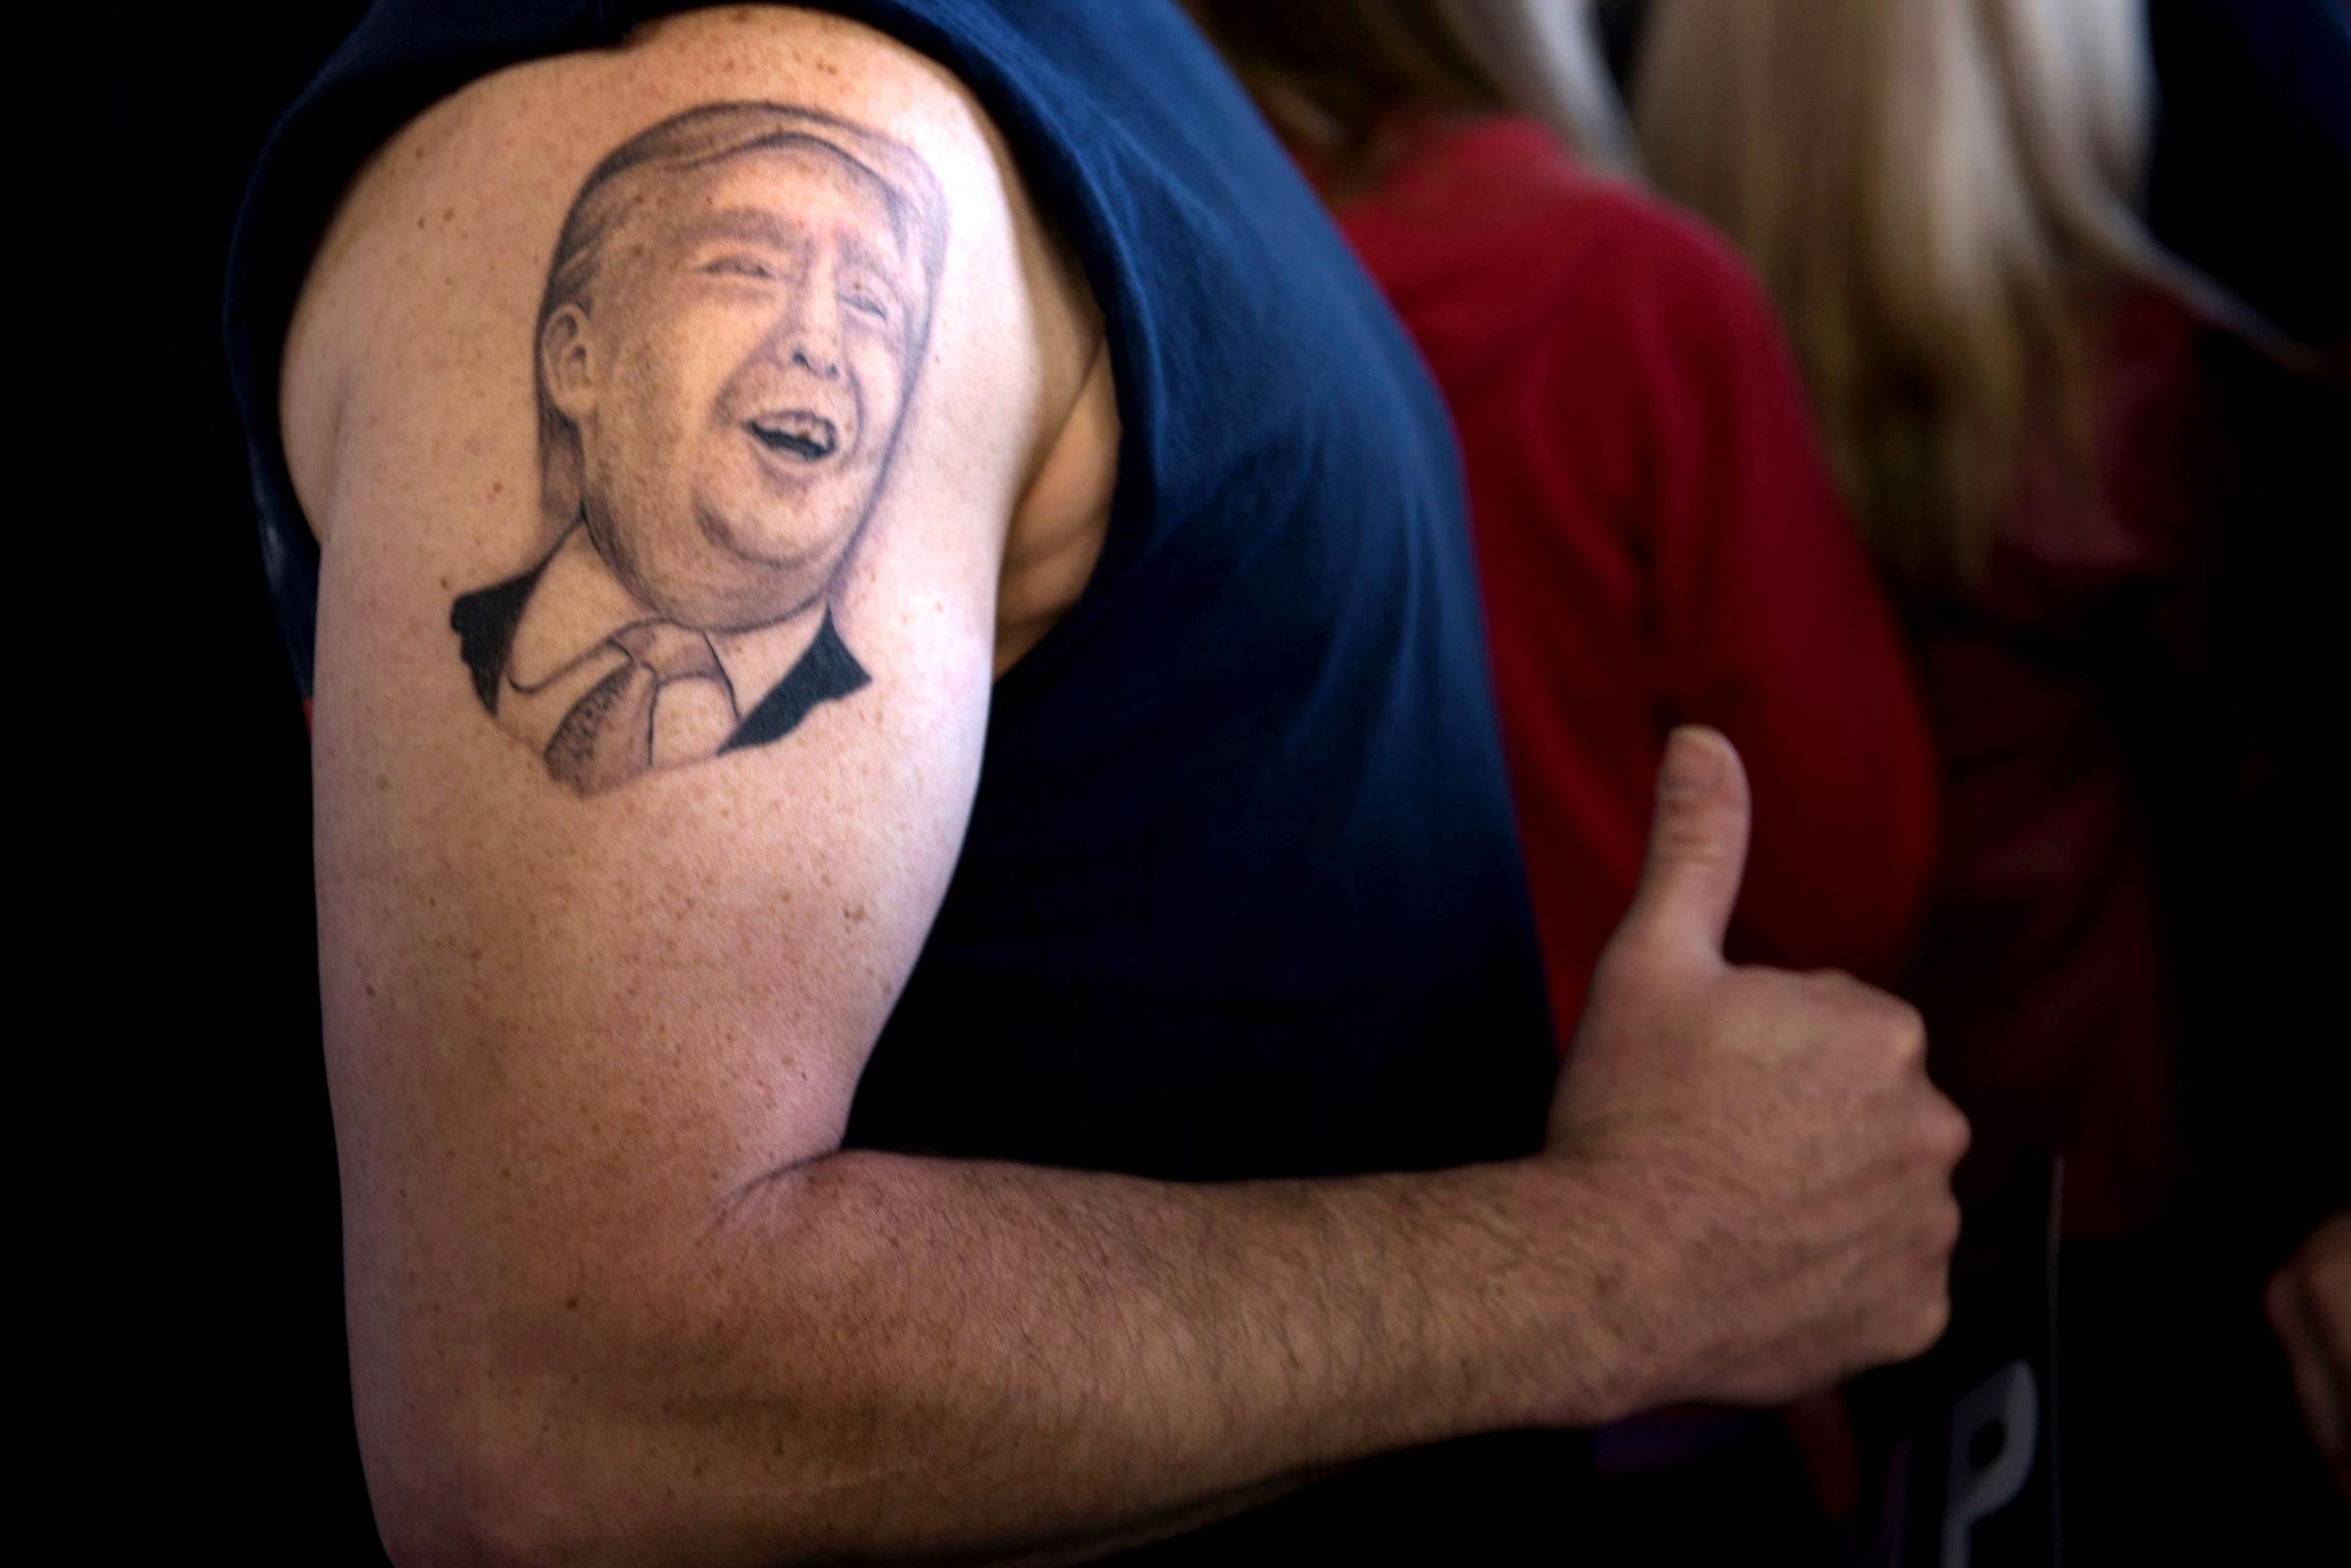 Anthony Borbell shows off his tattoo, a likeness of Donald Trump, during a rally on March 14 in Vienna Center, Ohio.